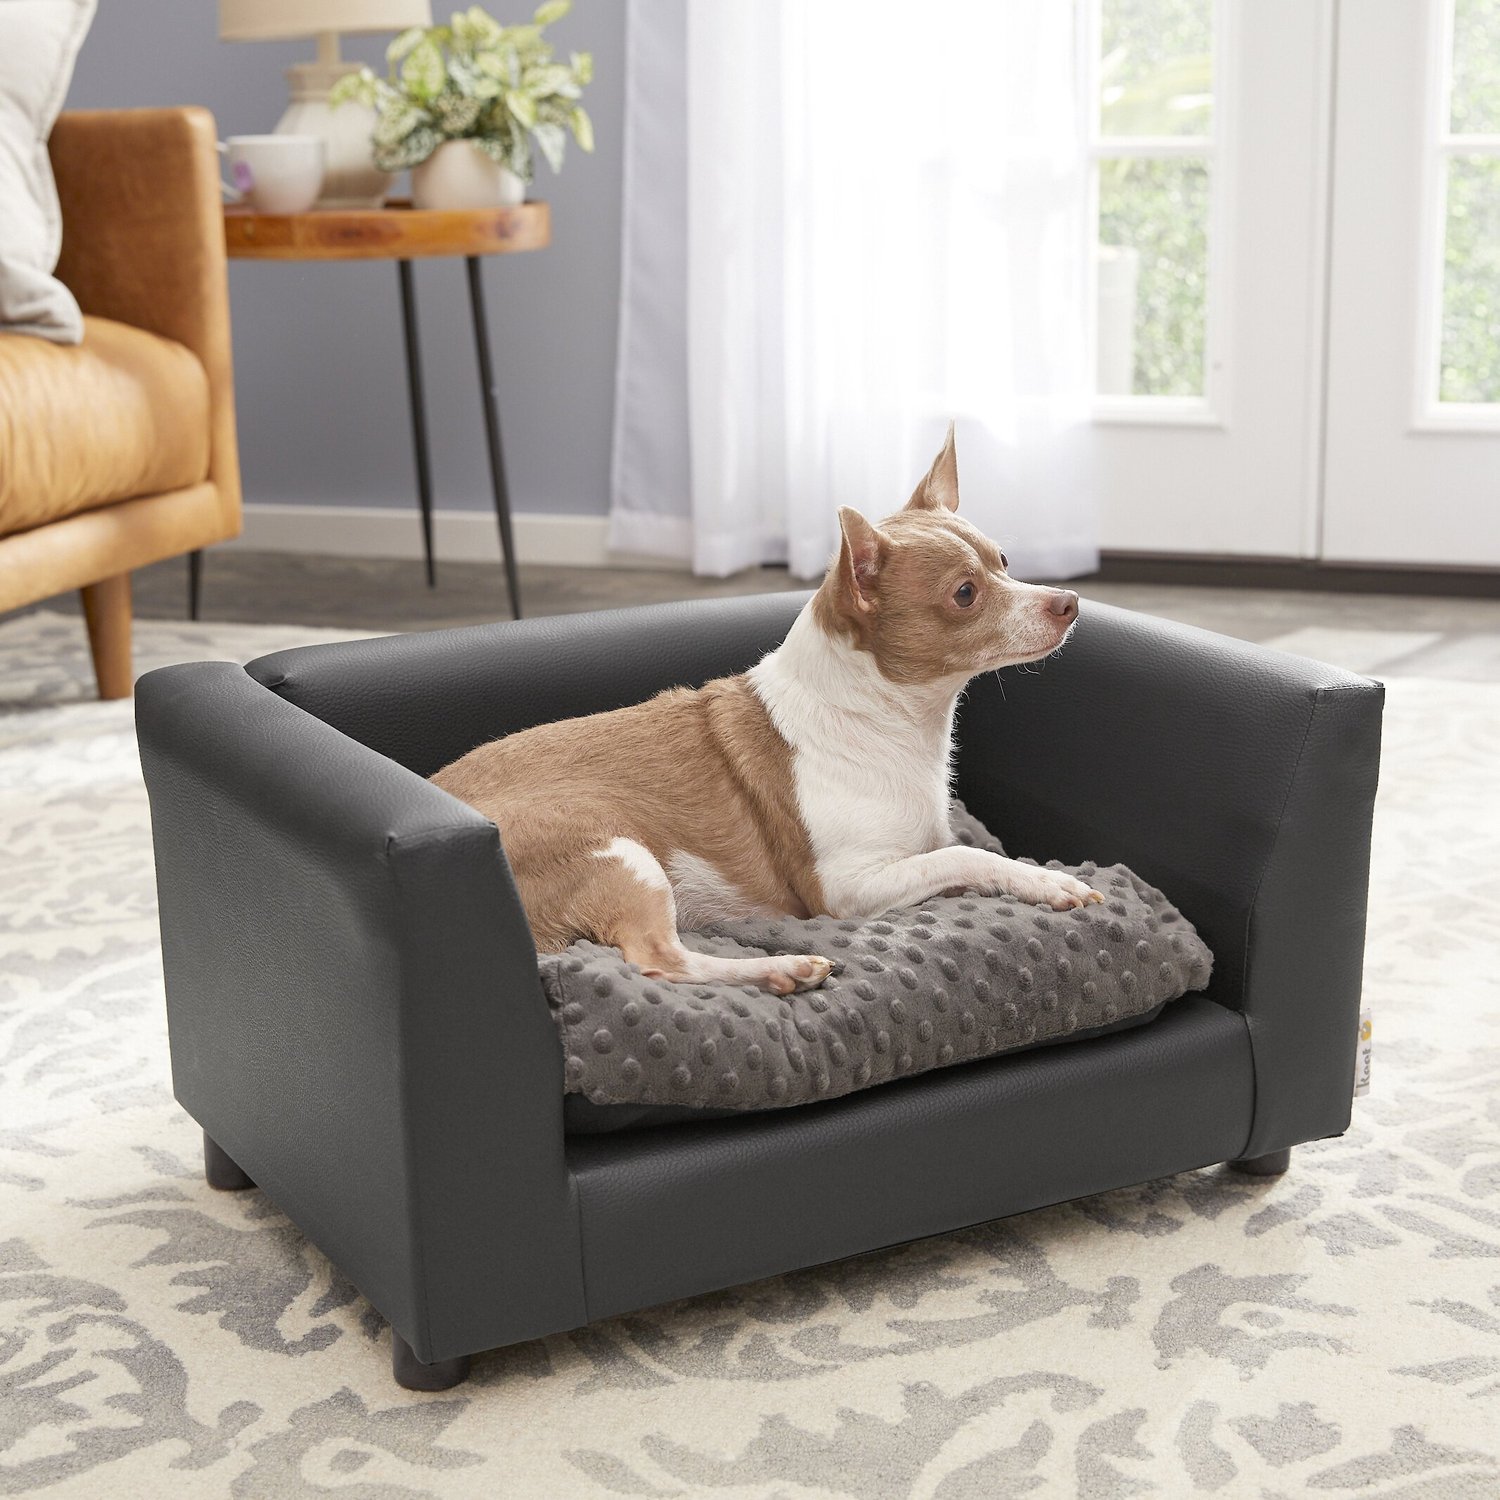 Keet Fluffly Deluxe Dog Bed Sofa, Charcoal, Small   Chewy.com